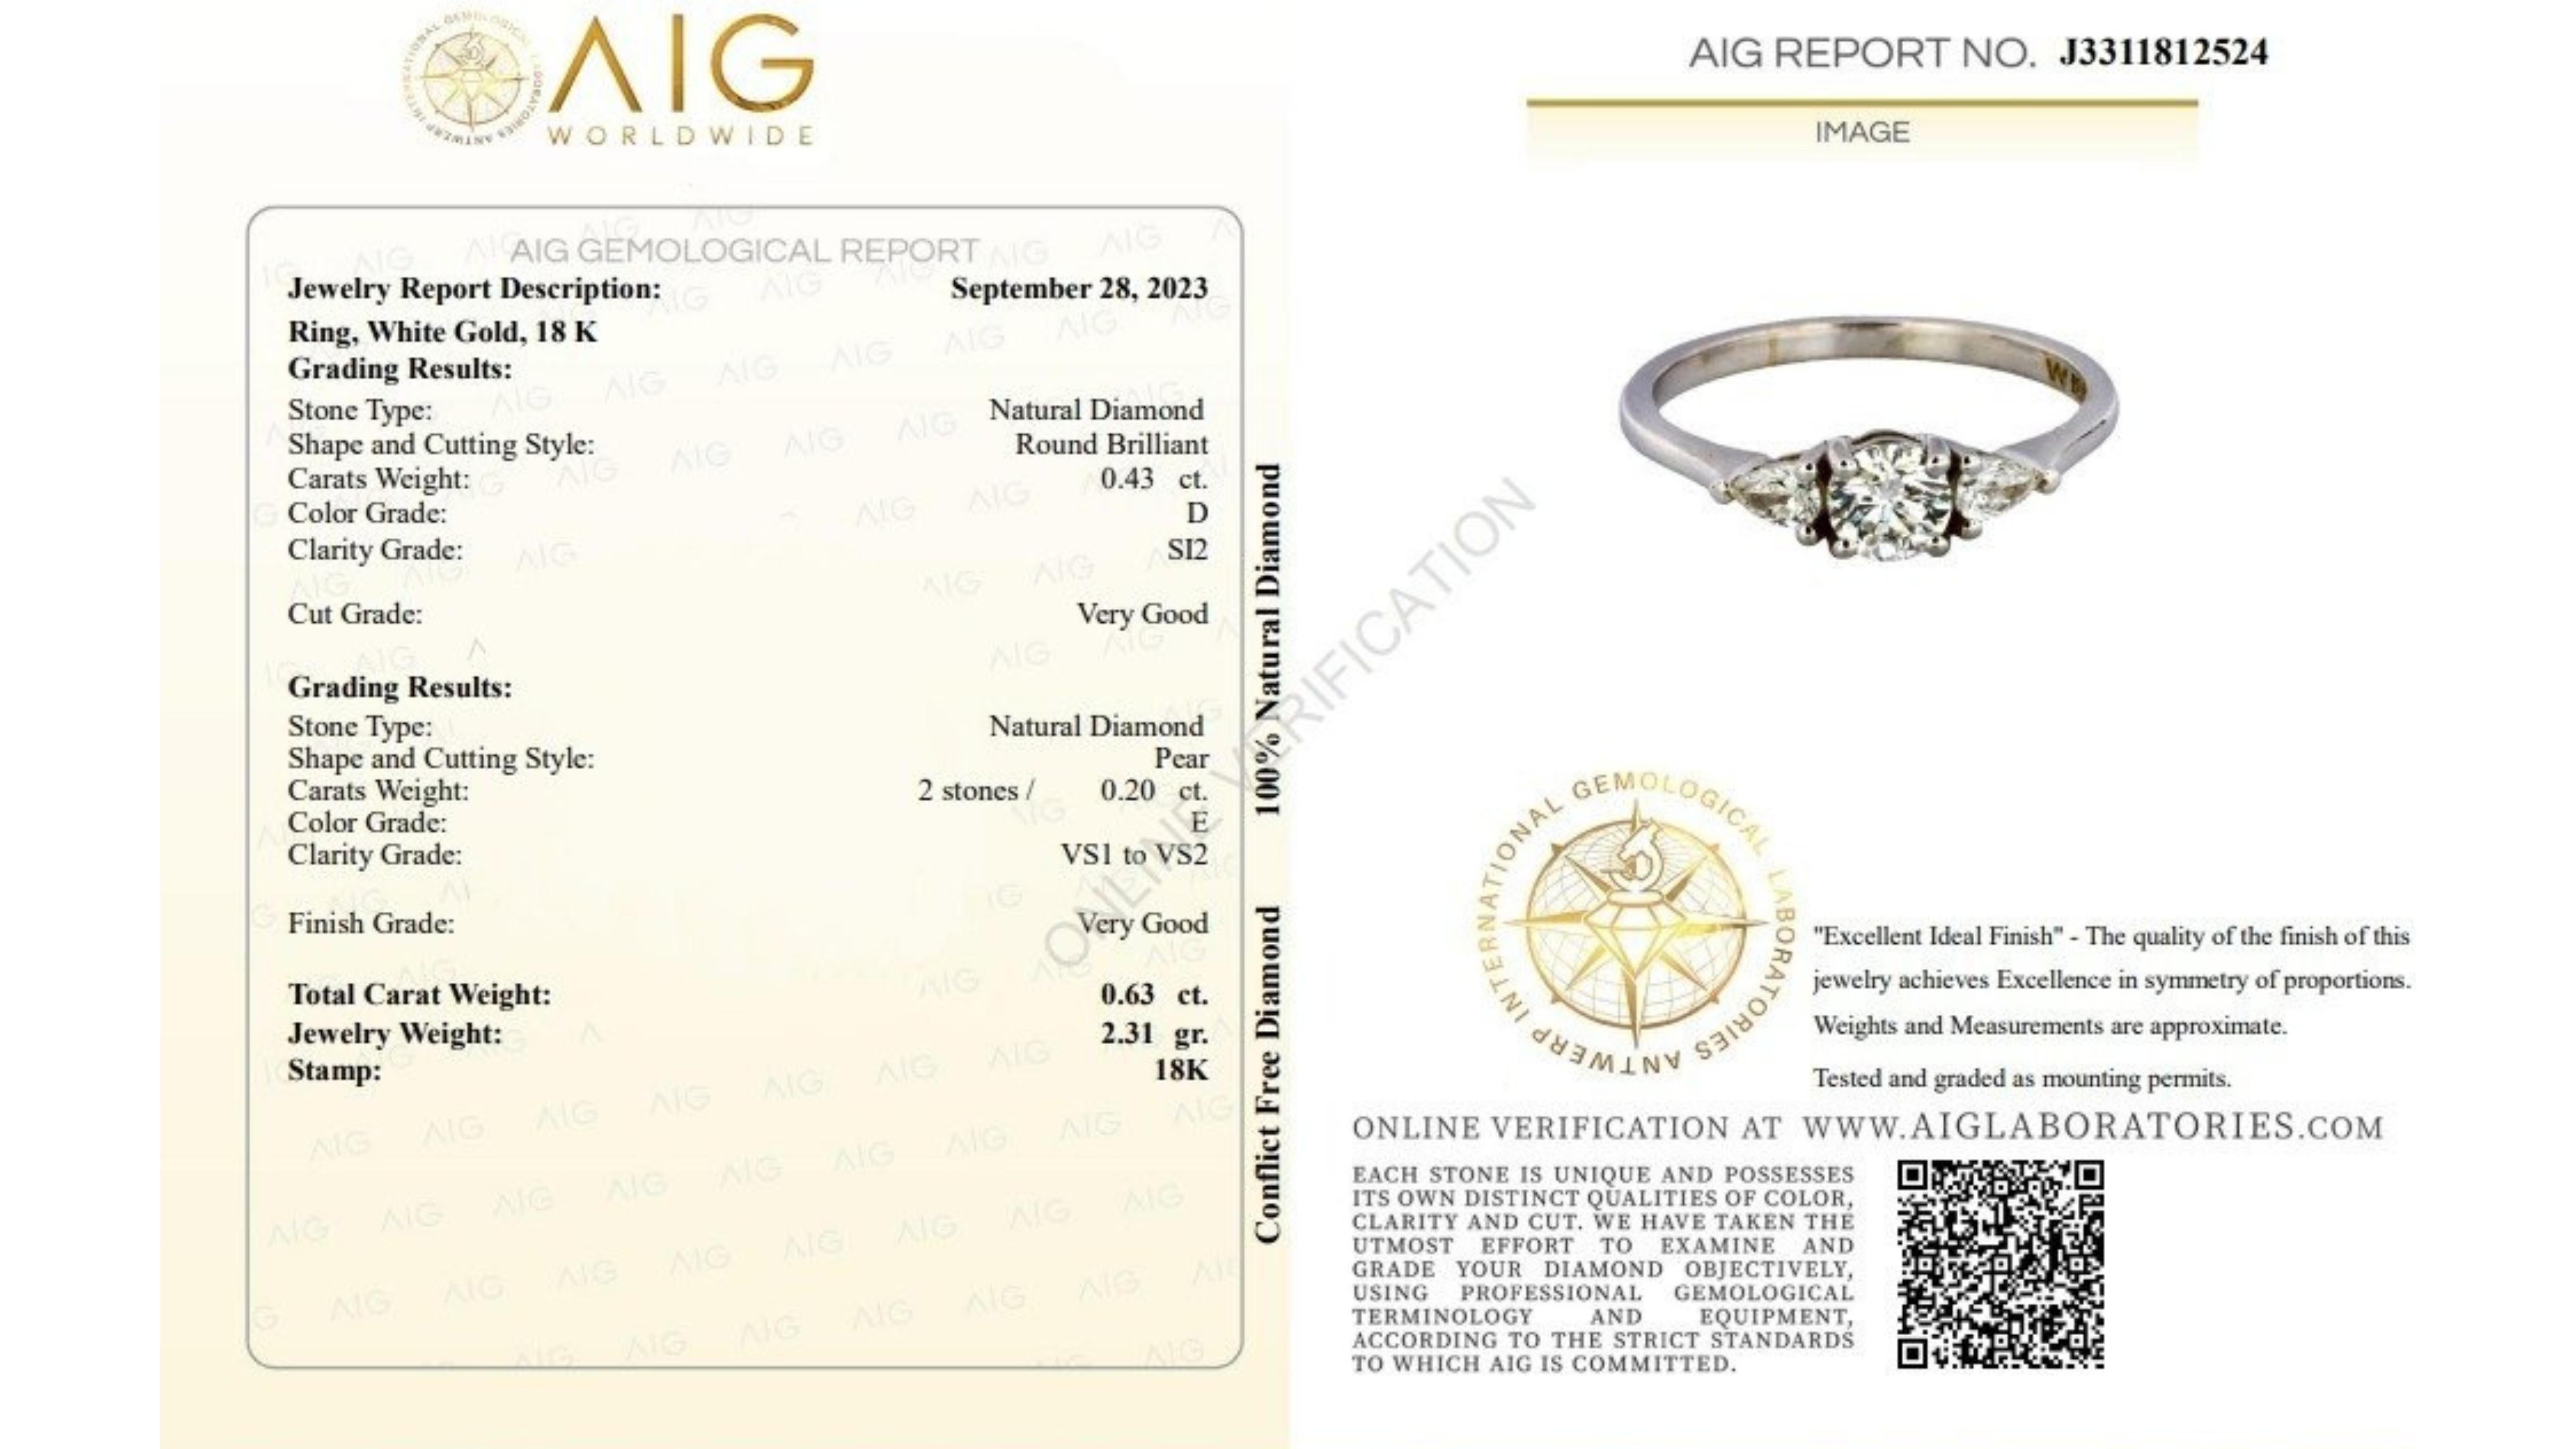 AIG Certified 0.63 Carat Round Brilliant Cut Diamond and Pear Brilliant Side Stones Three Stone Ring in 18K White Gold

This lovely three stone ring features a dazzling 0.43 carat round brilliant natural diamond center stone and 0.2 carats of pear